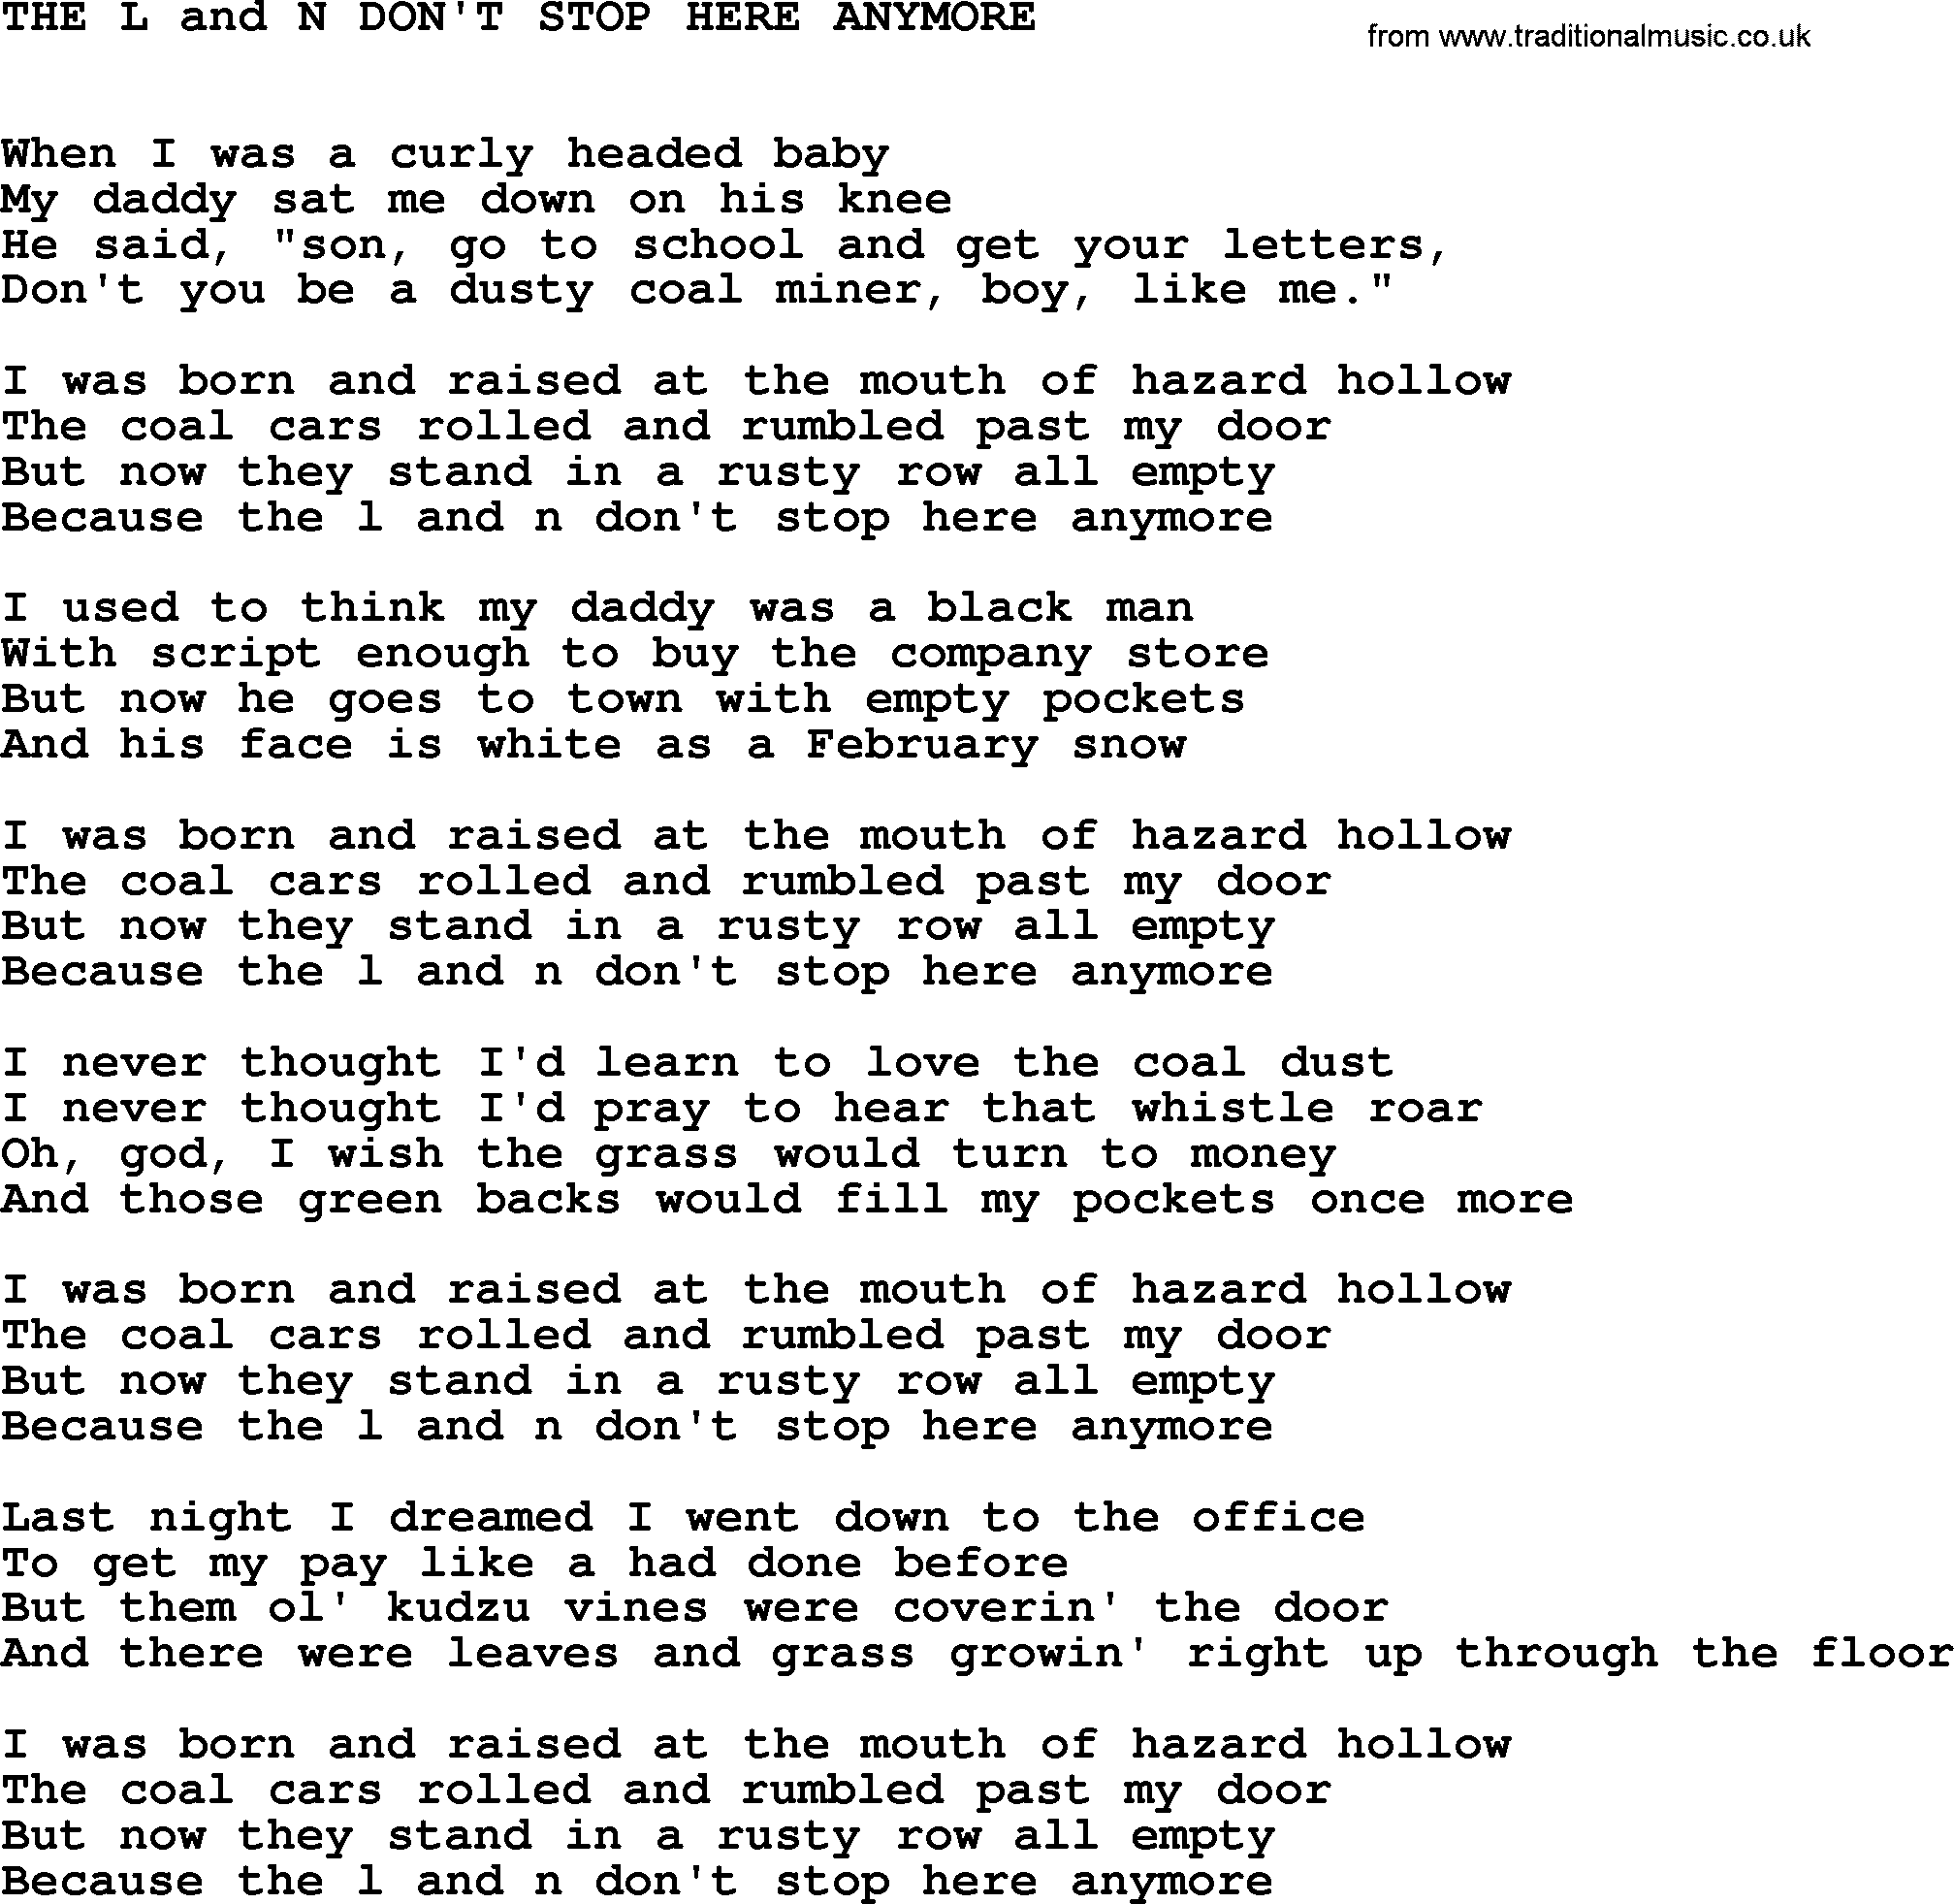 Johnny Cash song The L & N Don't Stop Here Anymore.txt lyrics